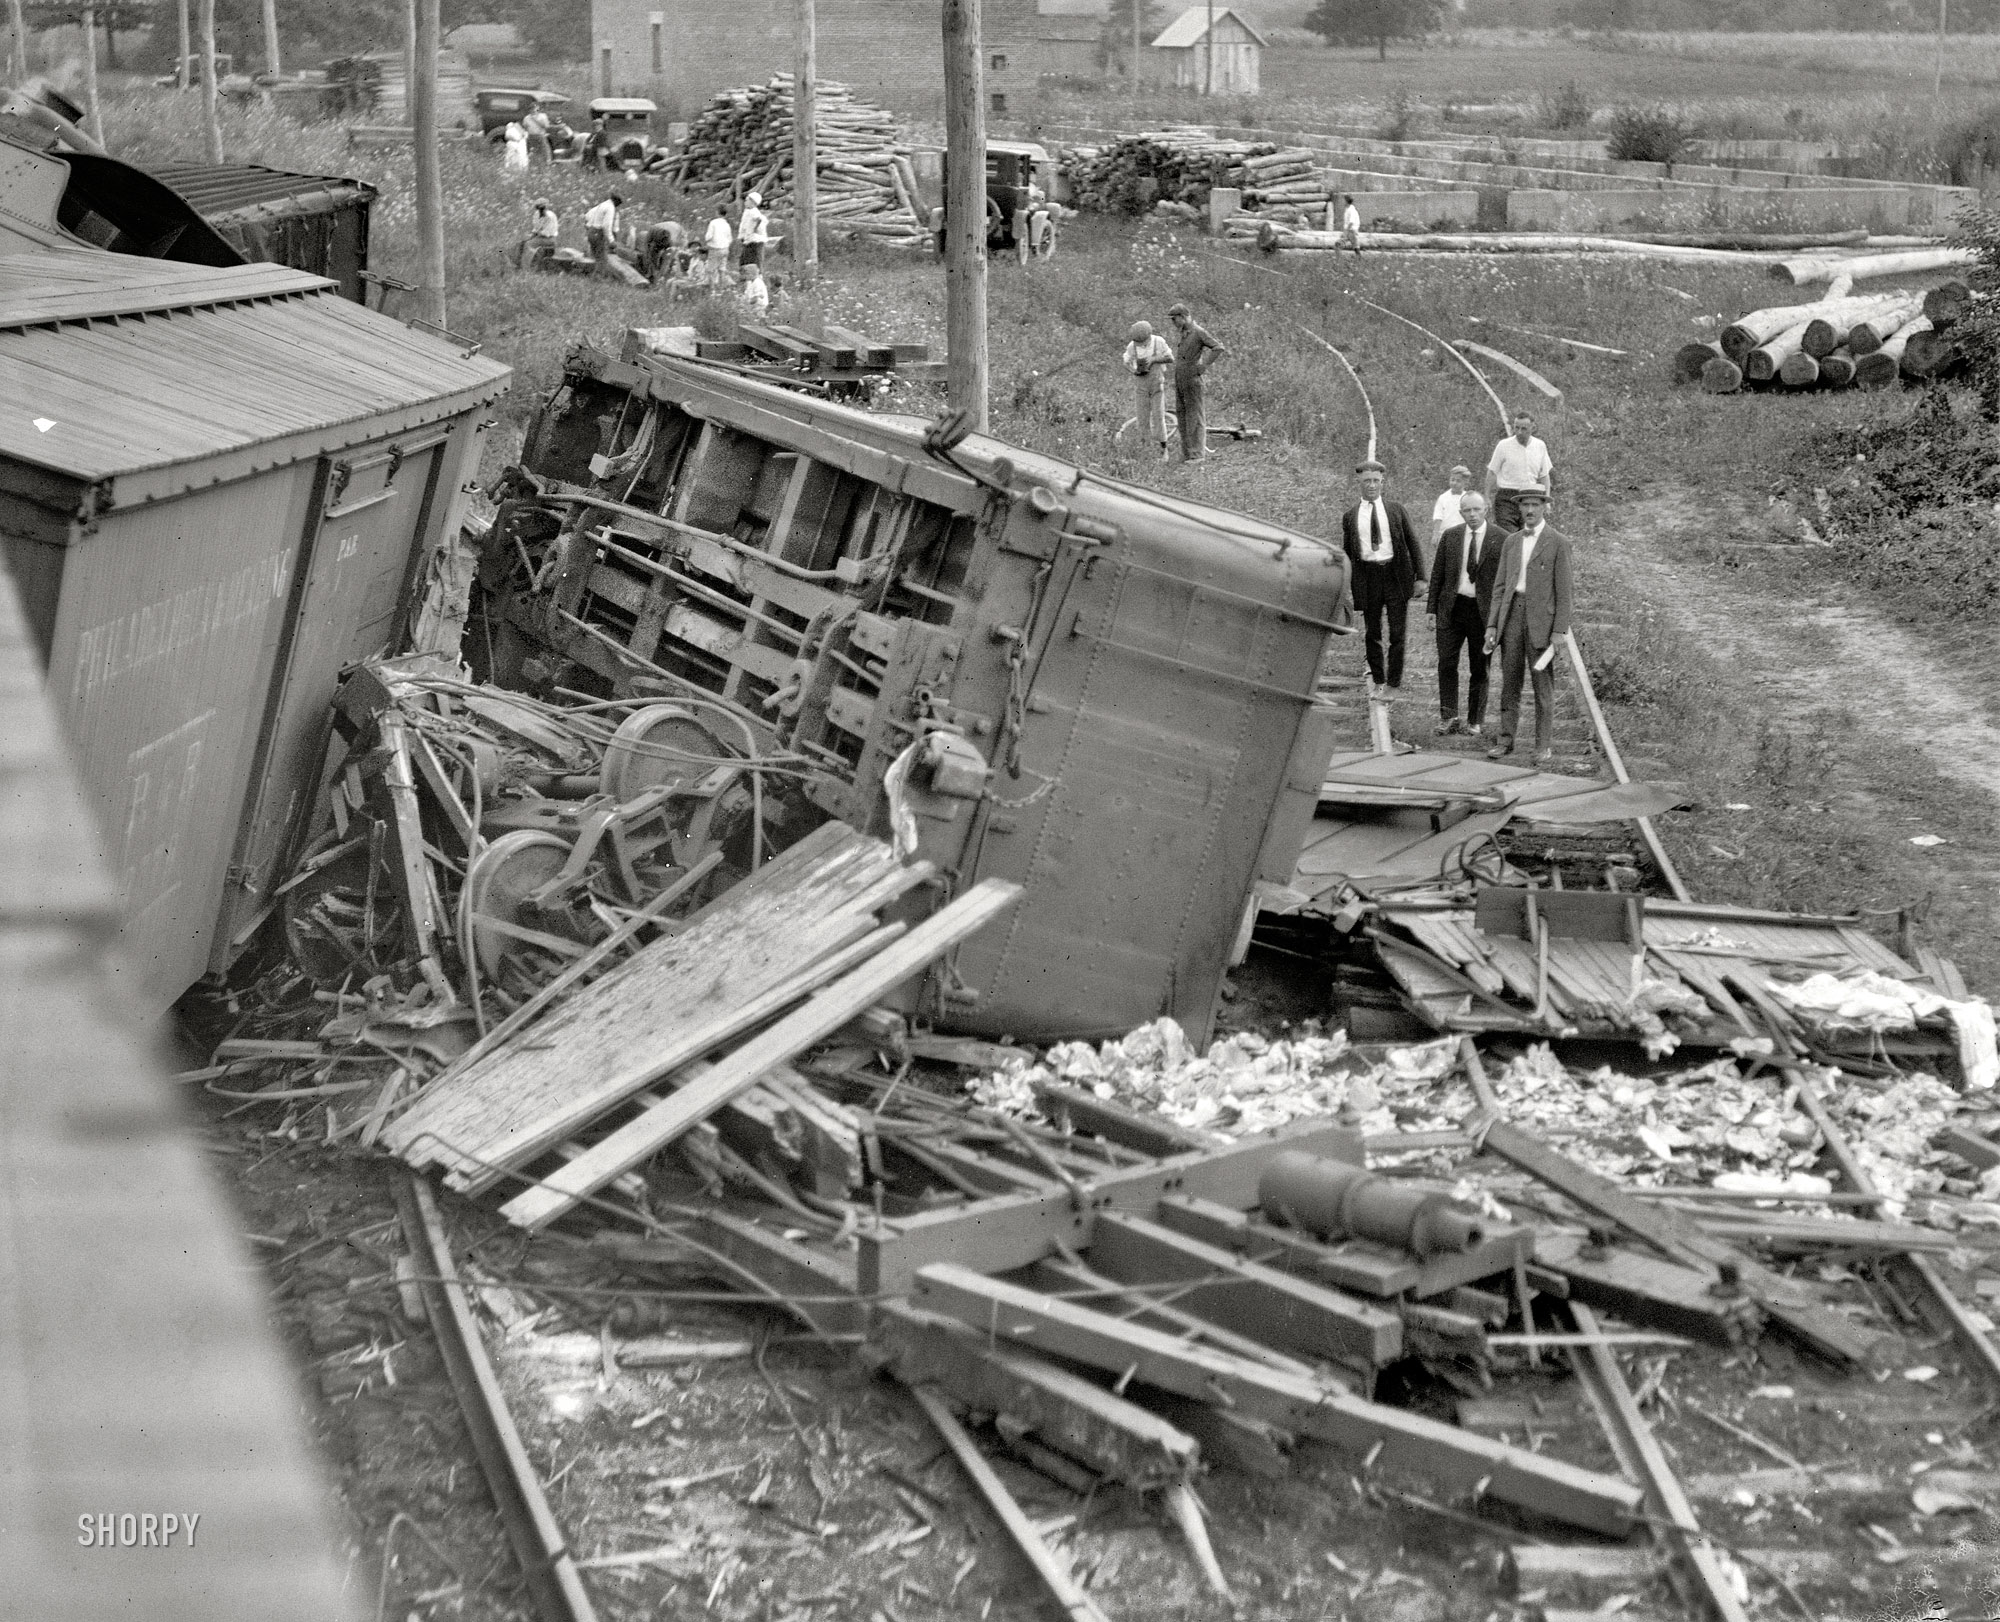 "Railroad wreck at Laurel, Maryland." Aftermath of the July 31, 1922, head-on collision of two B&O freight trains seen here yesterday. View full size.